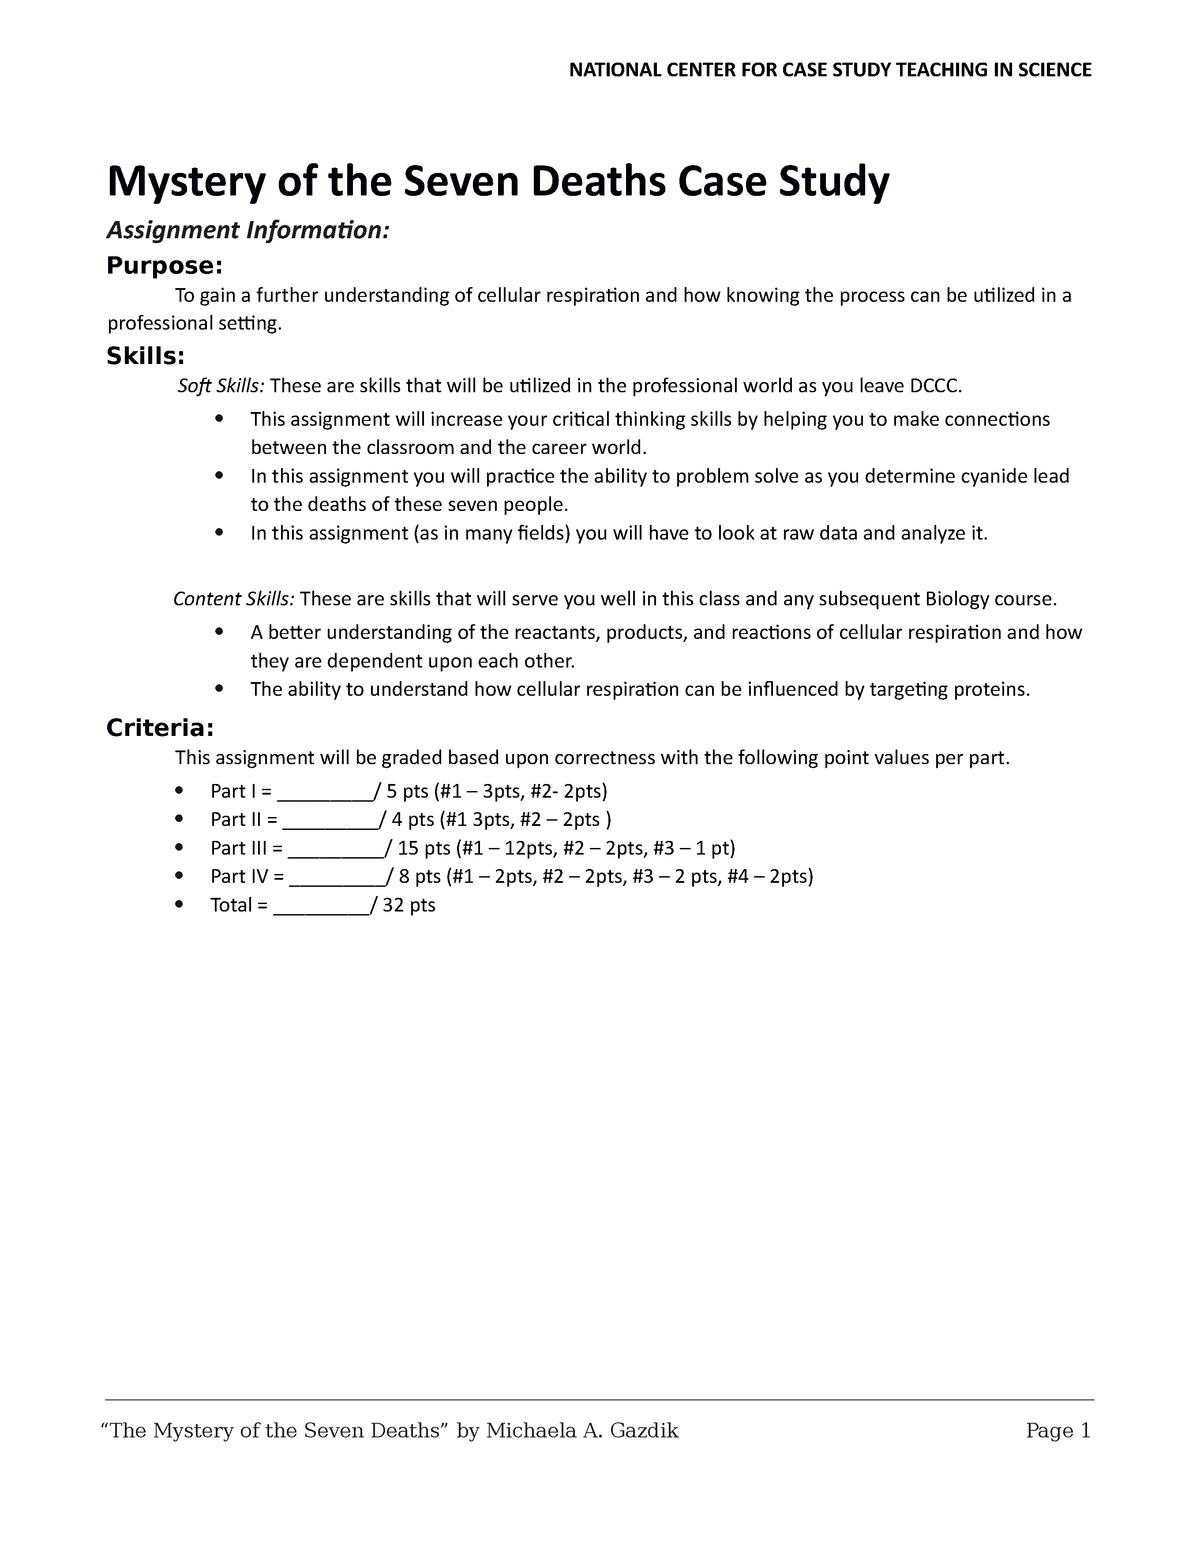 case study mystery of the 7 deaths answers